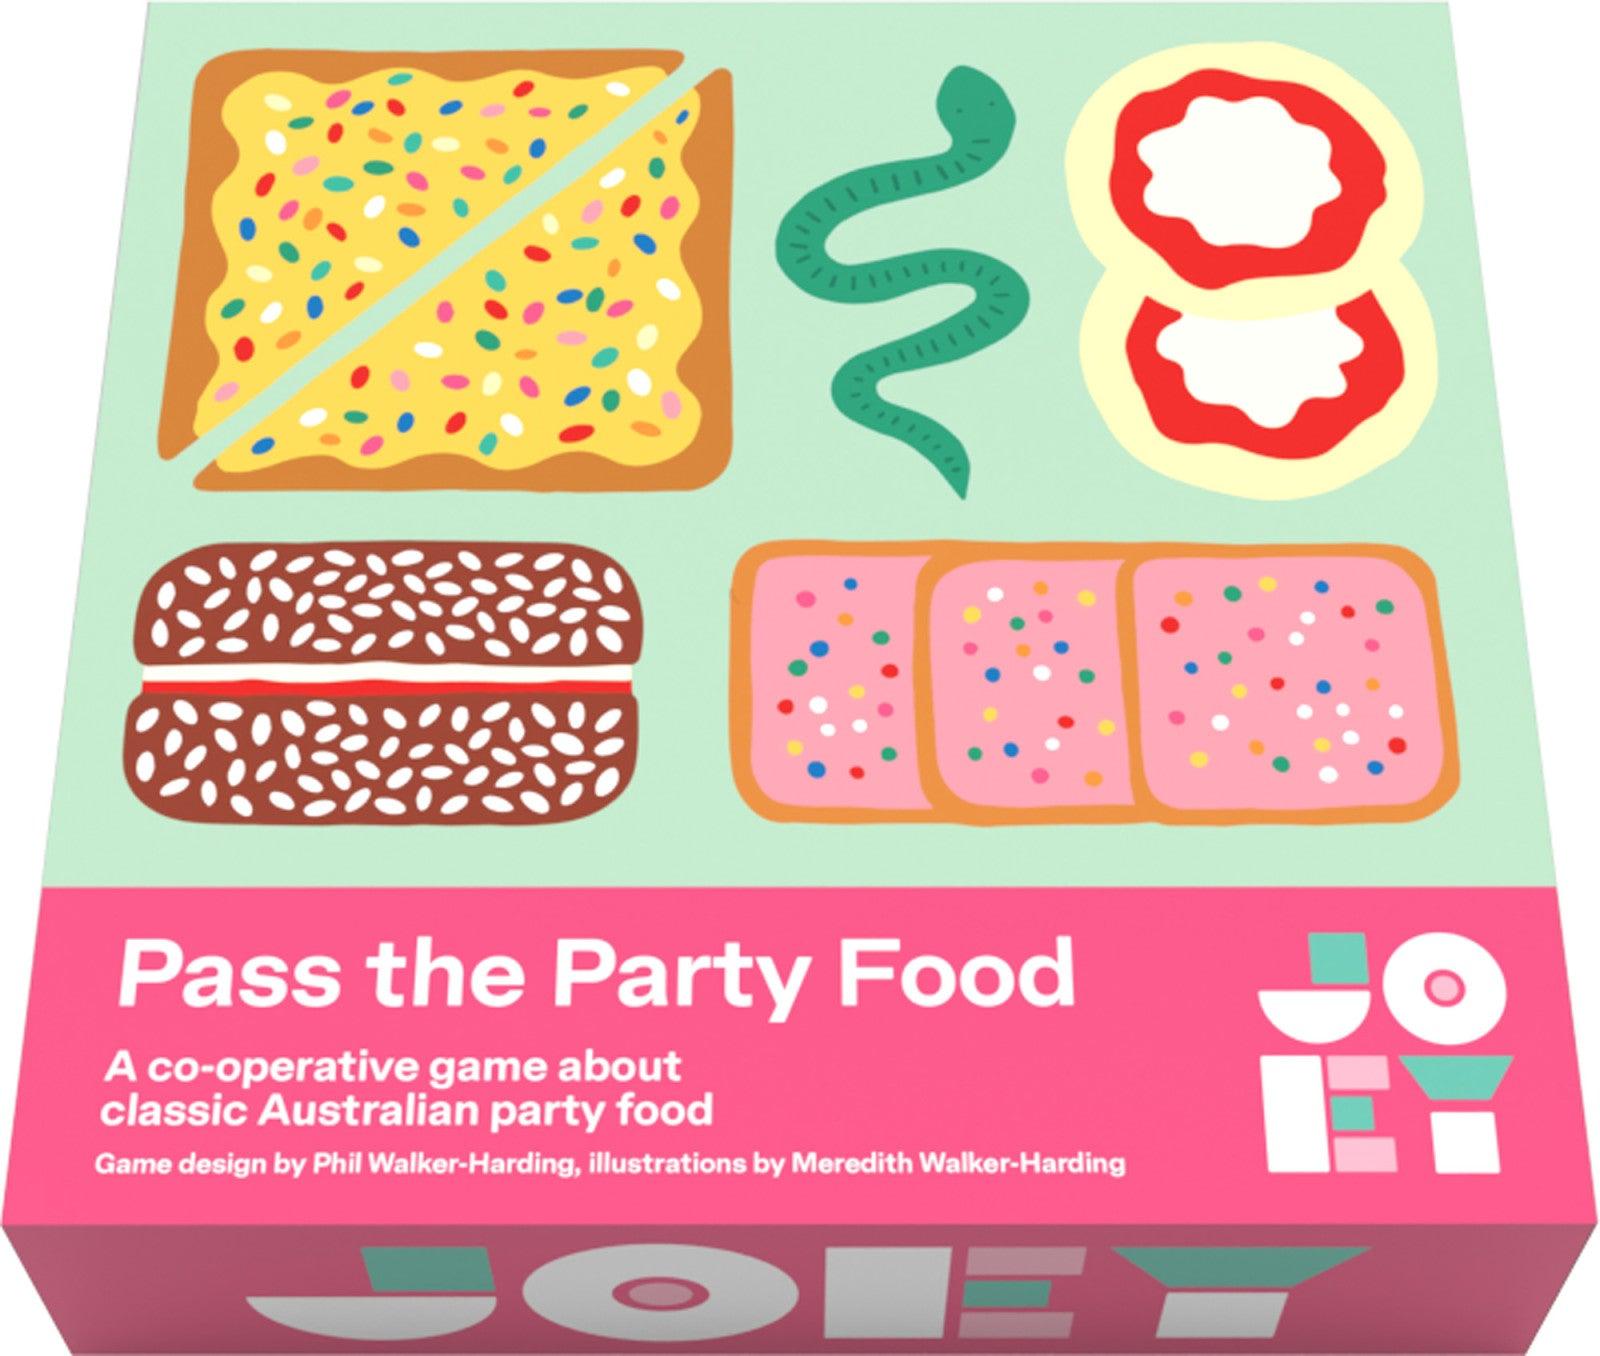 Pass the Party Food